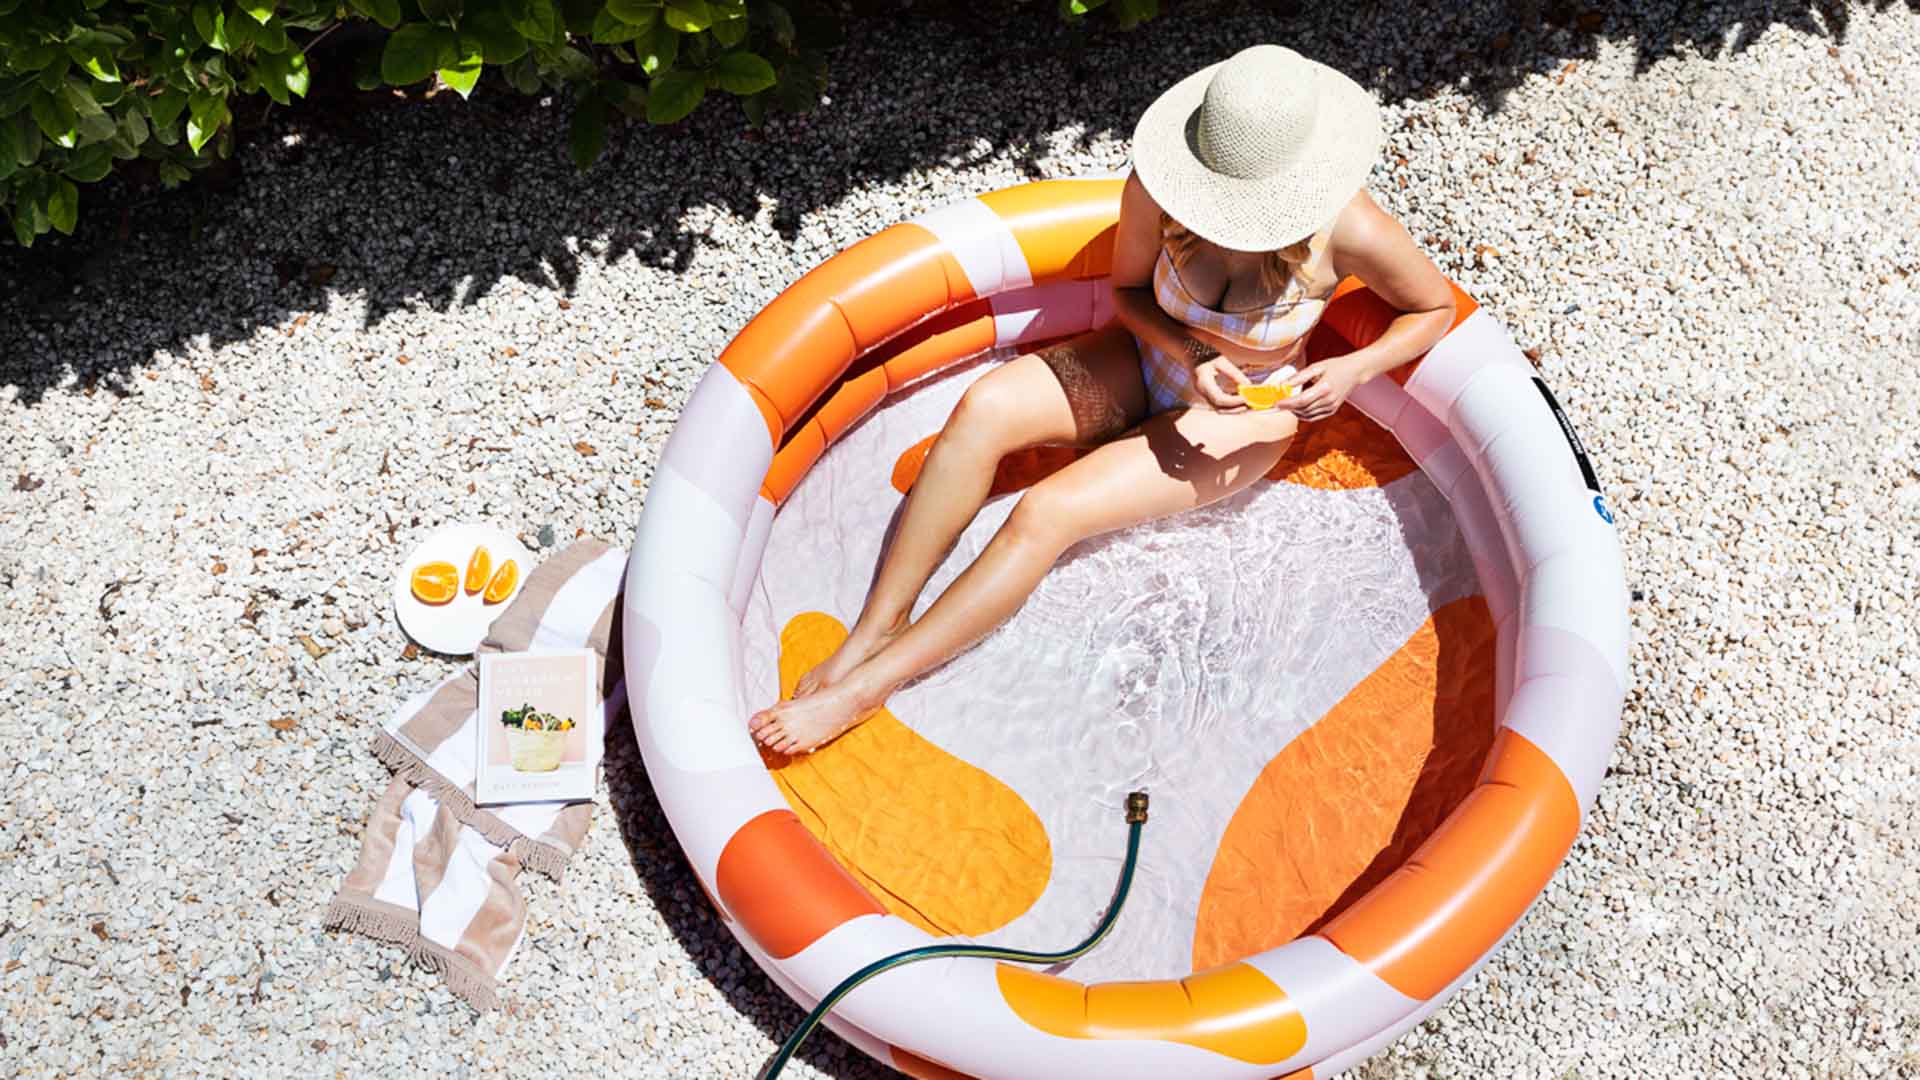 This New Aussie Company Is Making Ultra-Stylish Inflatable Pools to Brighten Up Your Summer